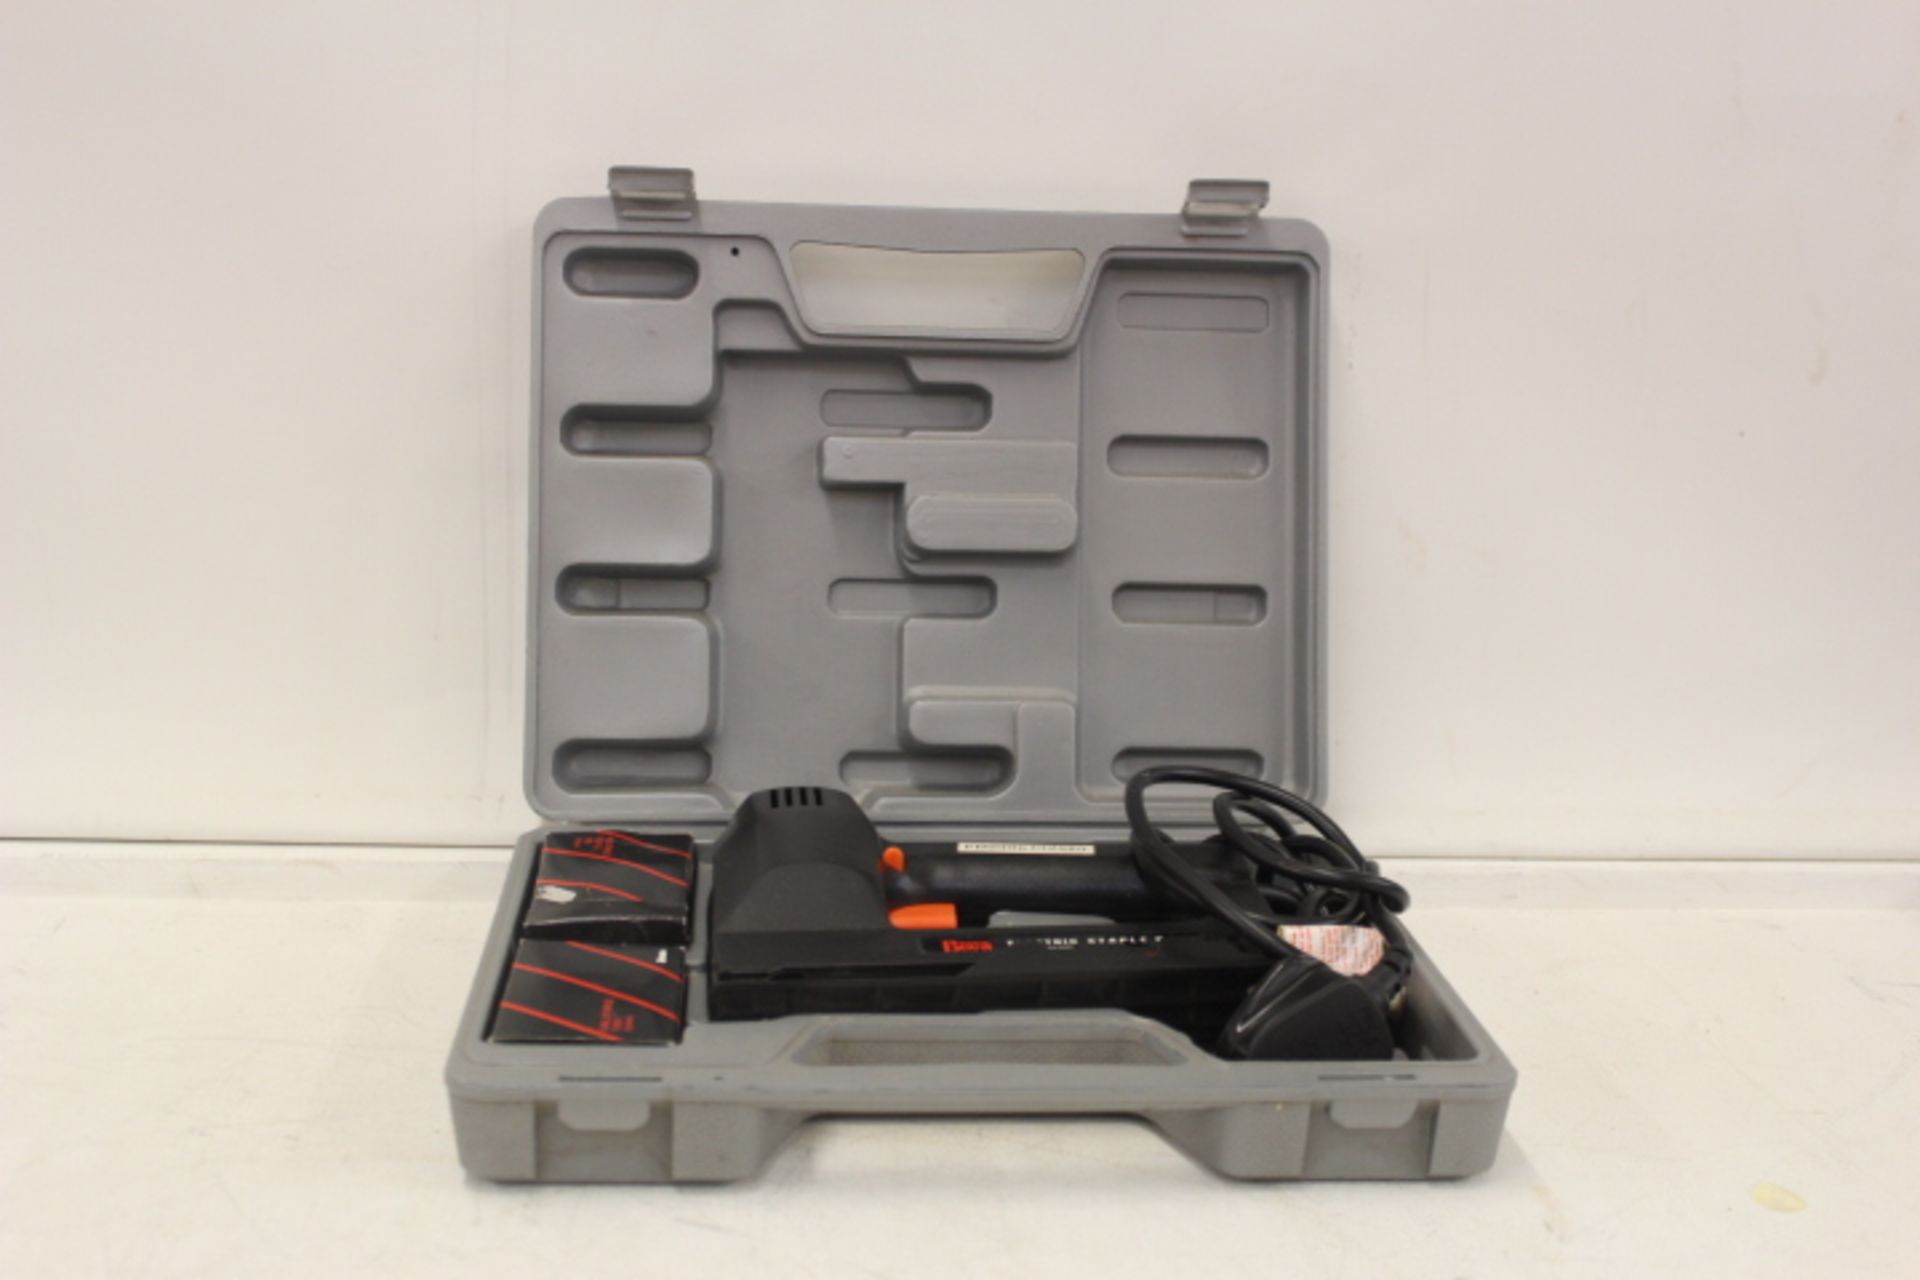 Grade U Power Devil Nail/Staple Gun In Carry Case With 1mm Staples & Nails